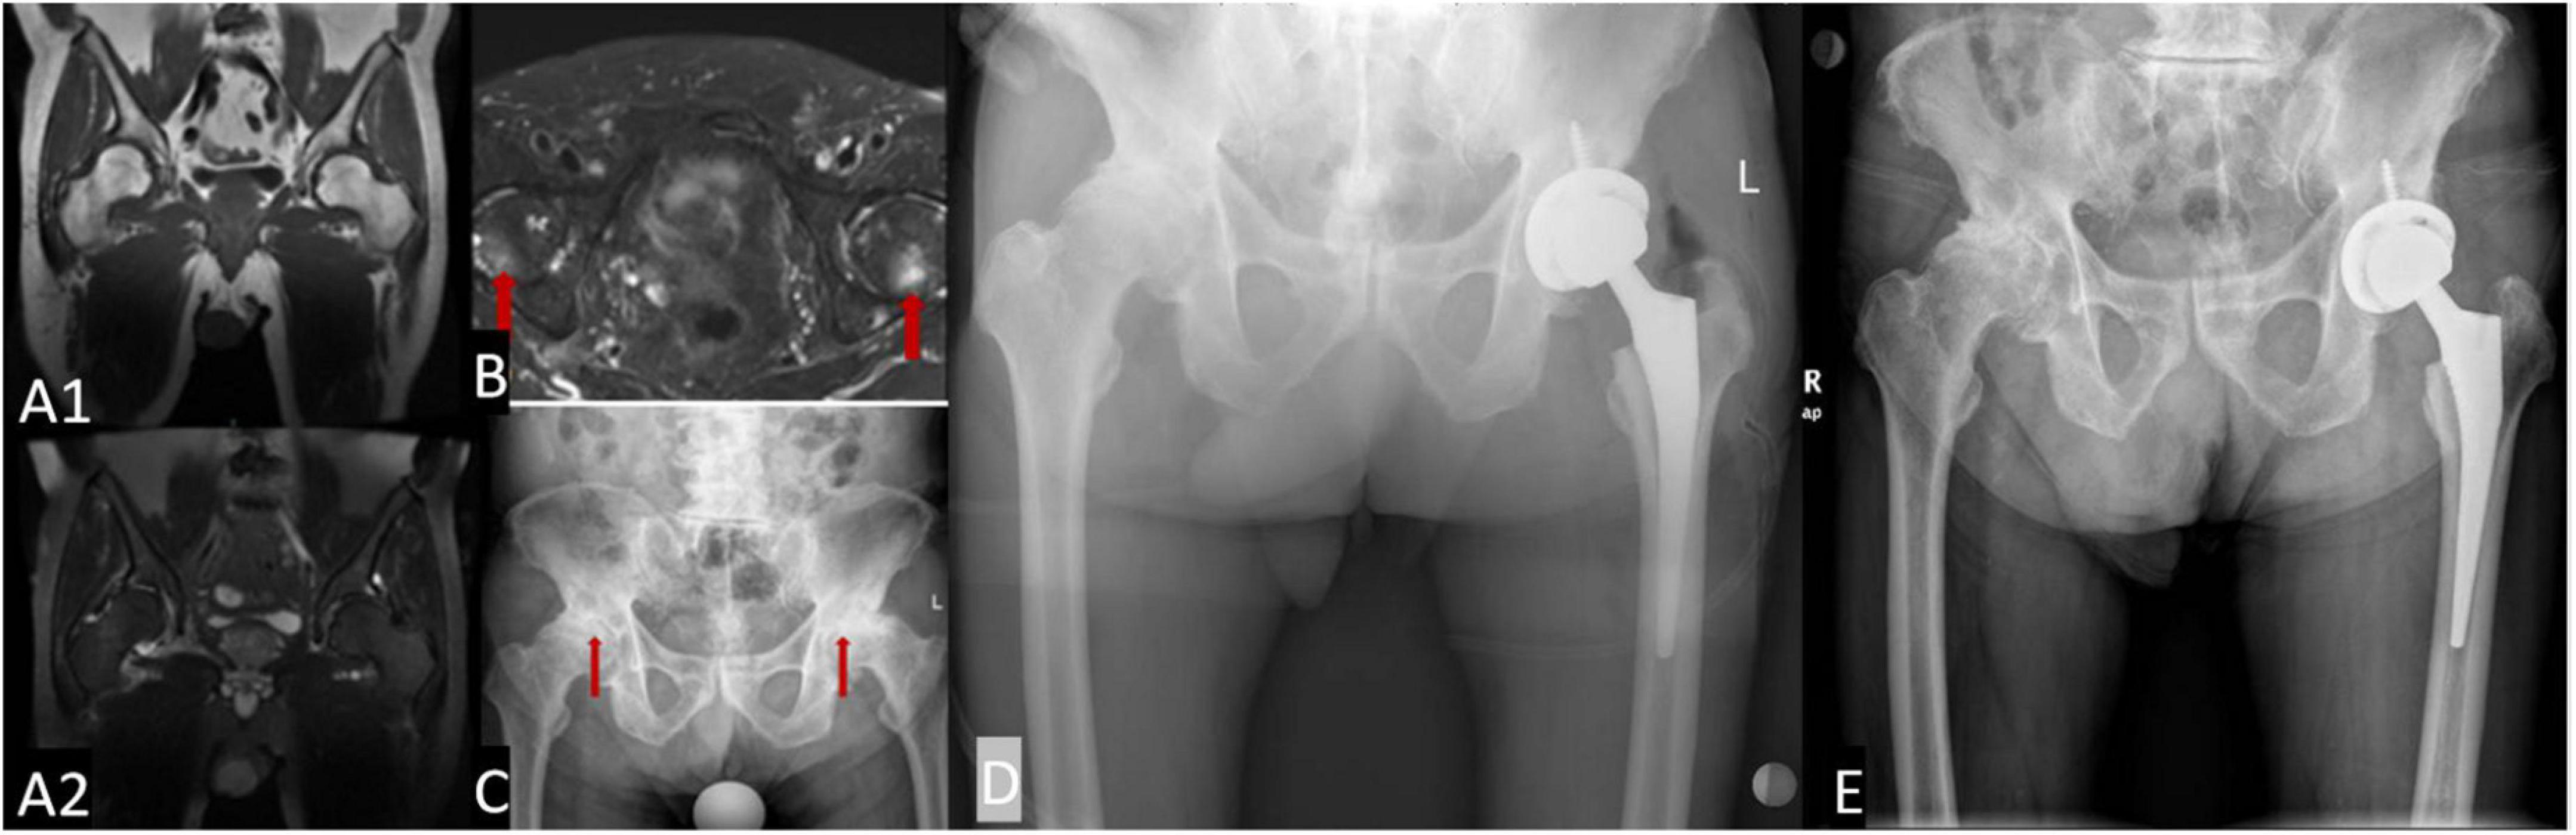 Frontiers Osteoradionecrosis of the Hip, a Troublesome Complication of Radiation Therapy Case Series and Systematic Review photo